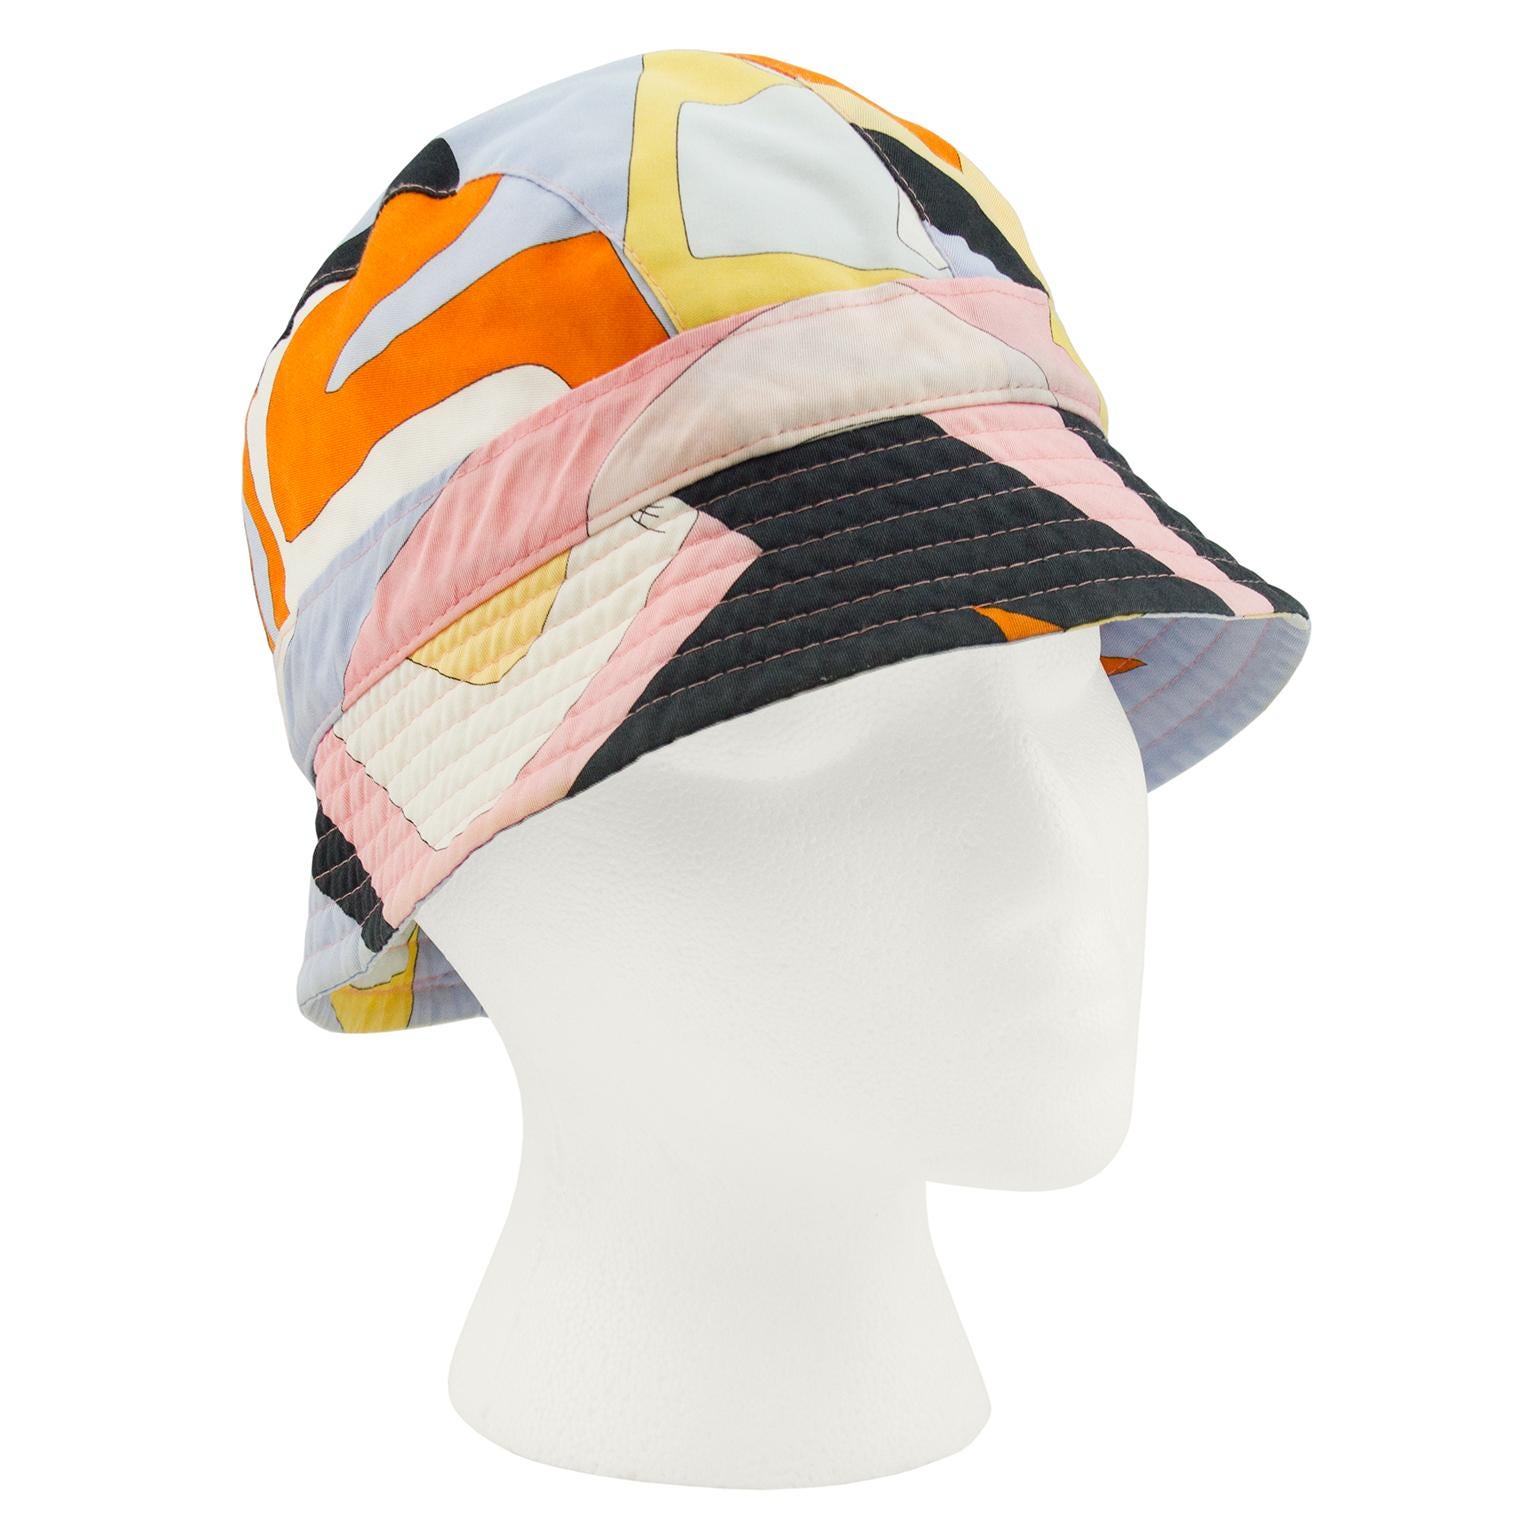 Emilio Pucci purple, pink, orange, black and yellow abstract printed cotton bucket hat from the late 1990/early 2000s. A snug fit with a clean white interior and pink stitching along the ribbed brim. Brand markings throughout fabric. In excellent